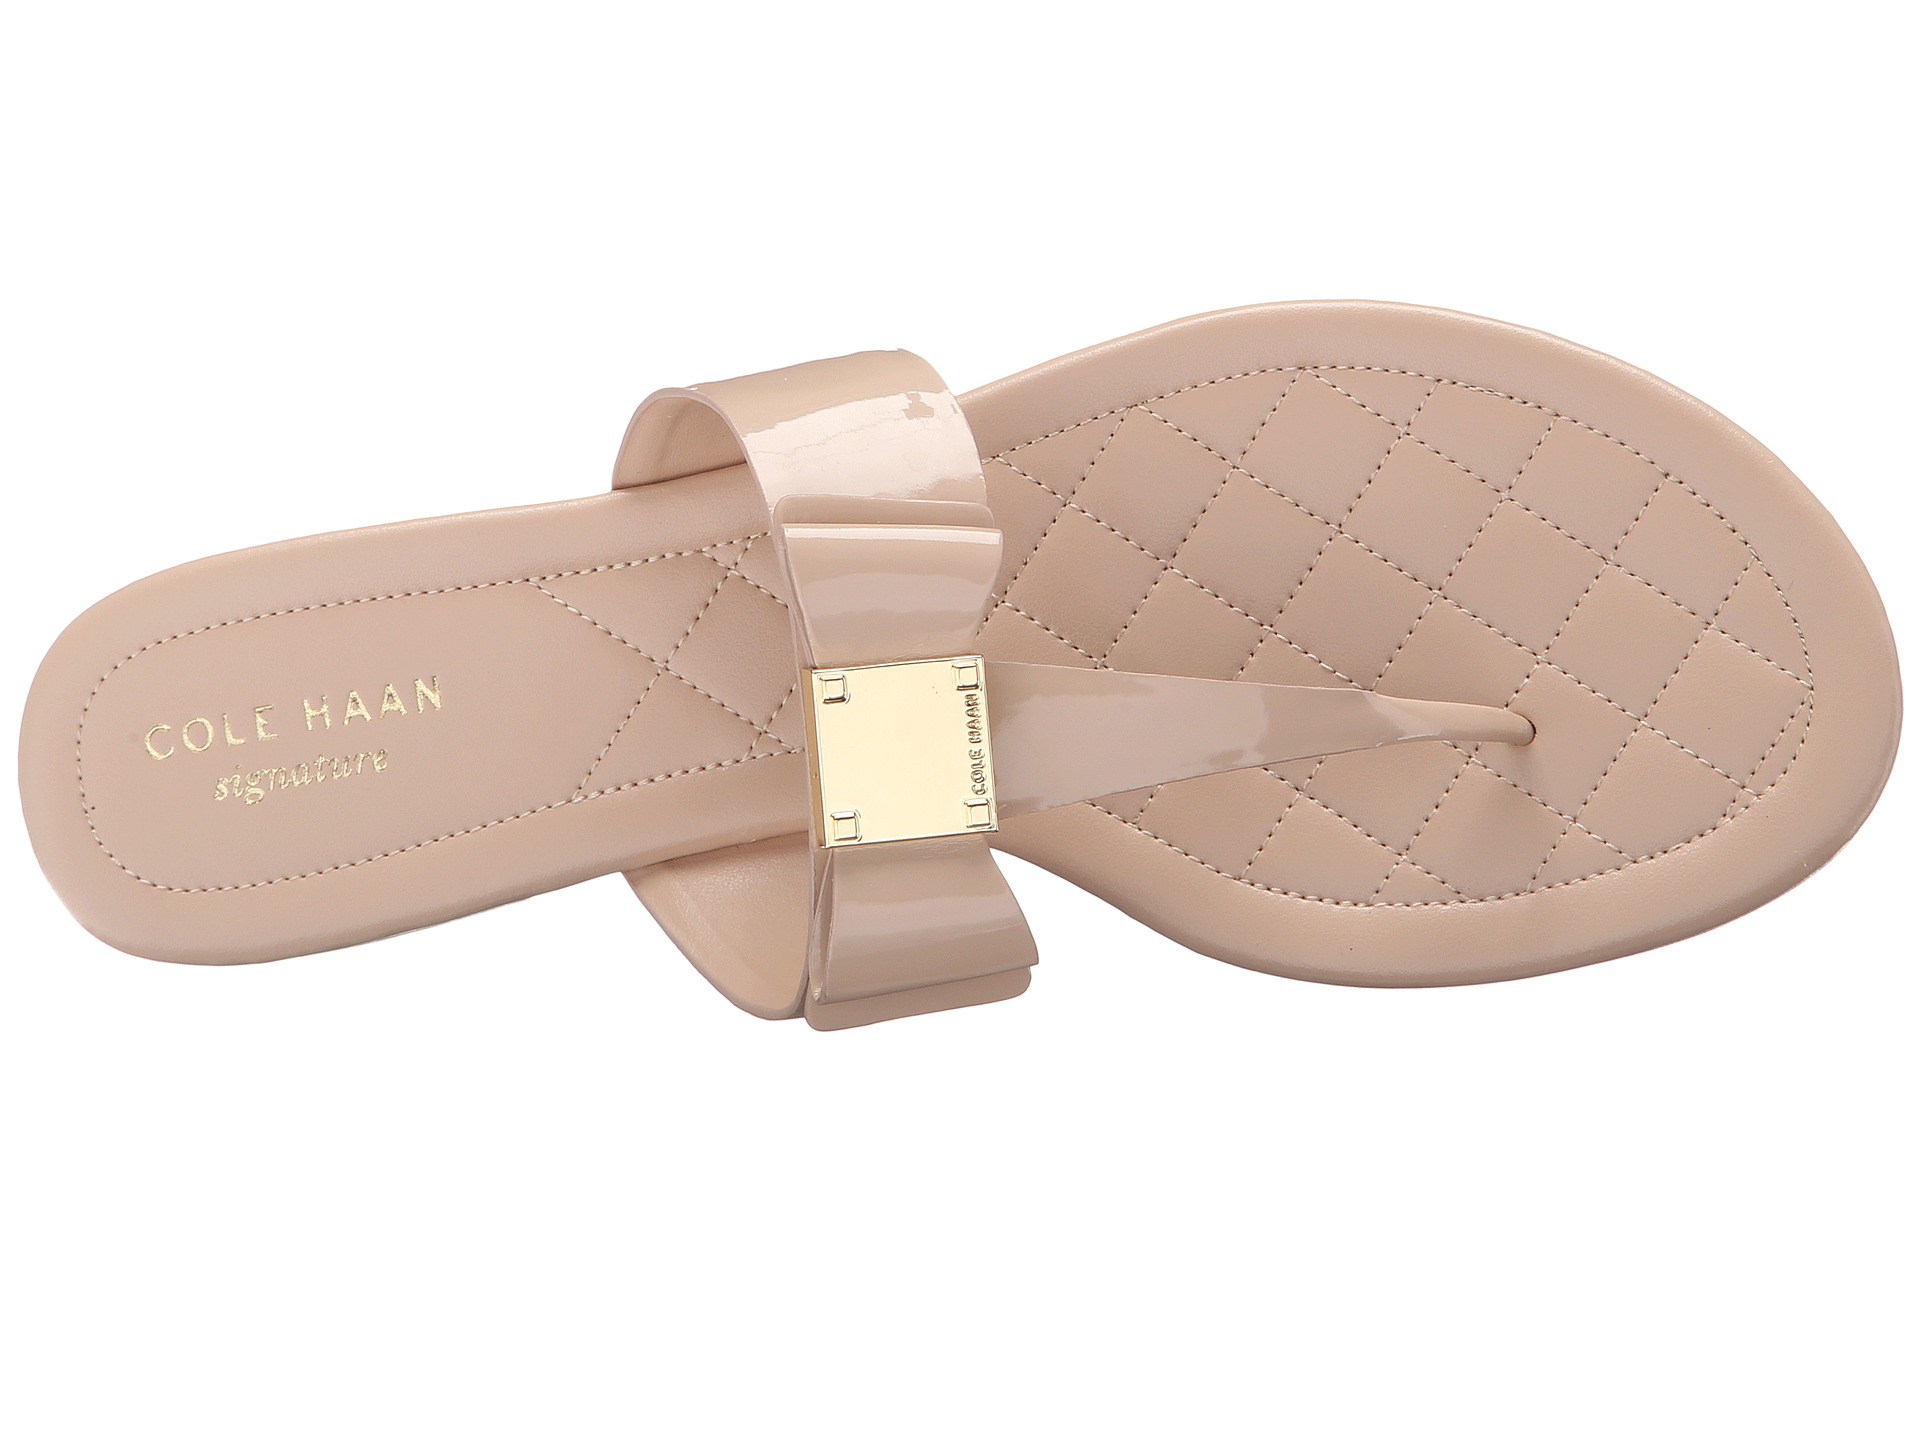 Cole Haan Tali Bow Sandal Nude Patent, Shoes, Cole Haan, Women